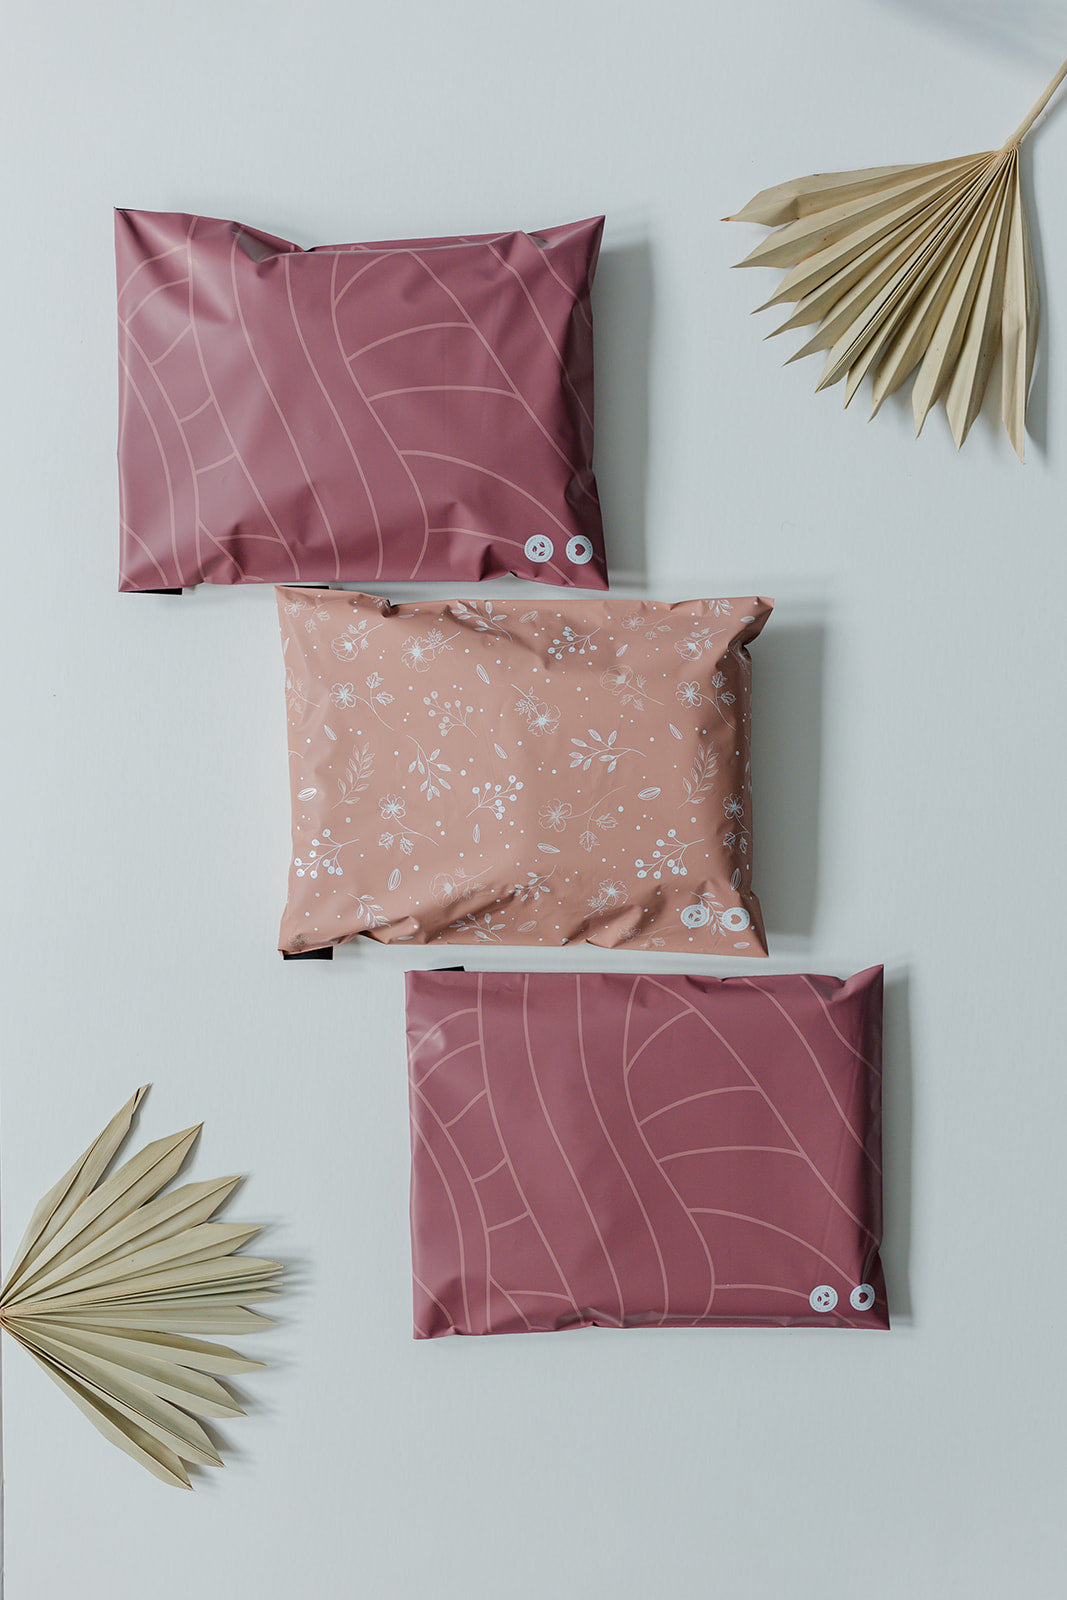 Three Copper Rose Leaf Biodegradable Mailers 10" x 13" with palm leaves on a recyclable surface from impack.co.